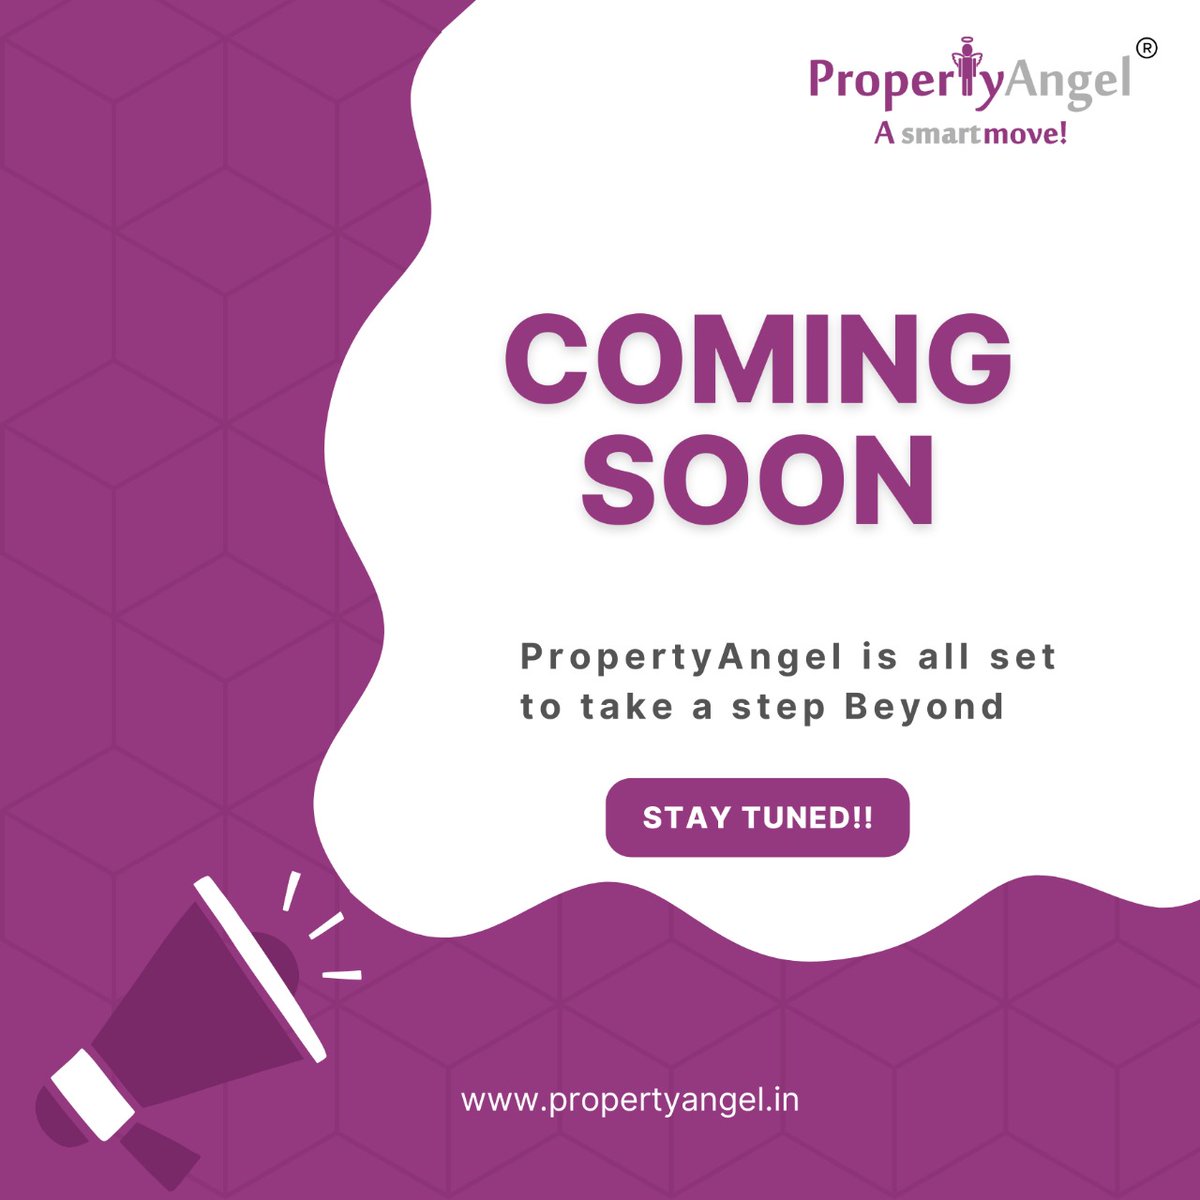 We’ve got a little secret brewing in our creative kitchen at PropertyAngel and the aroma of excitement is in the air.

#propertyangel #propertymanagement #realestateindia #nriinvestments #knowledgesharing #realestatelearning #nris #propathon #industryexperts #realestateexperts